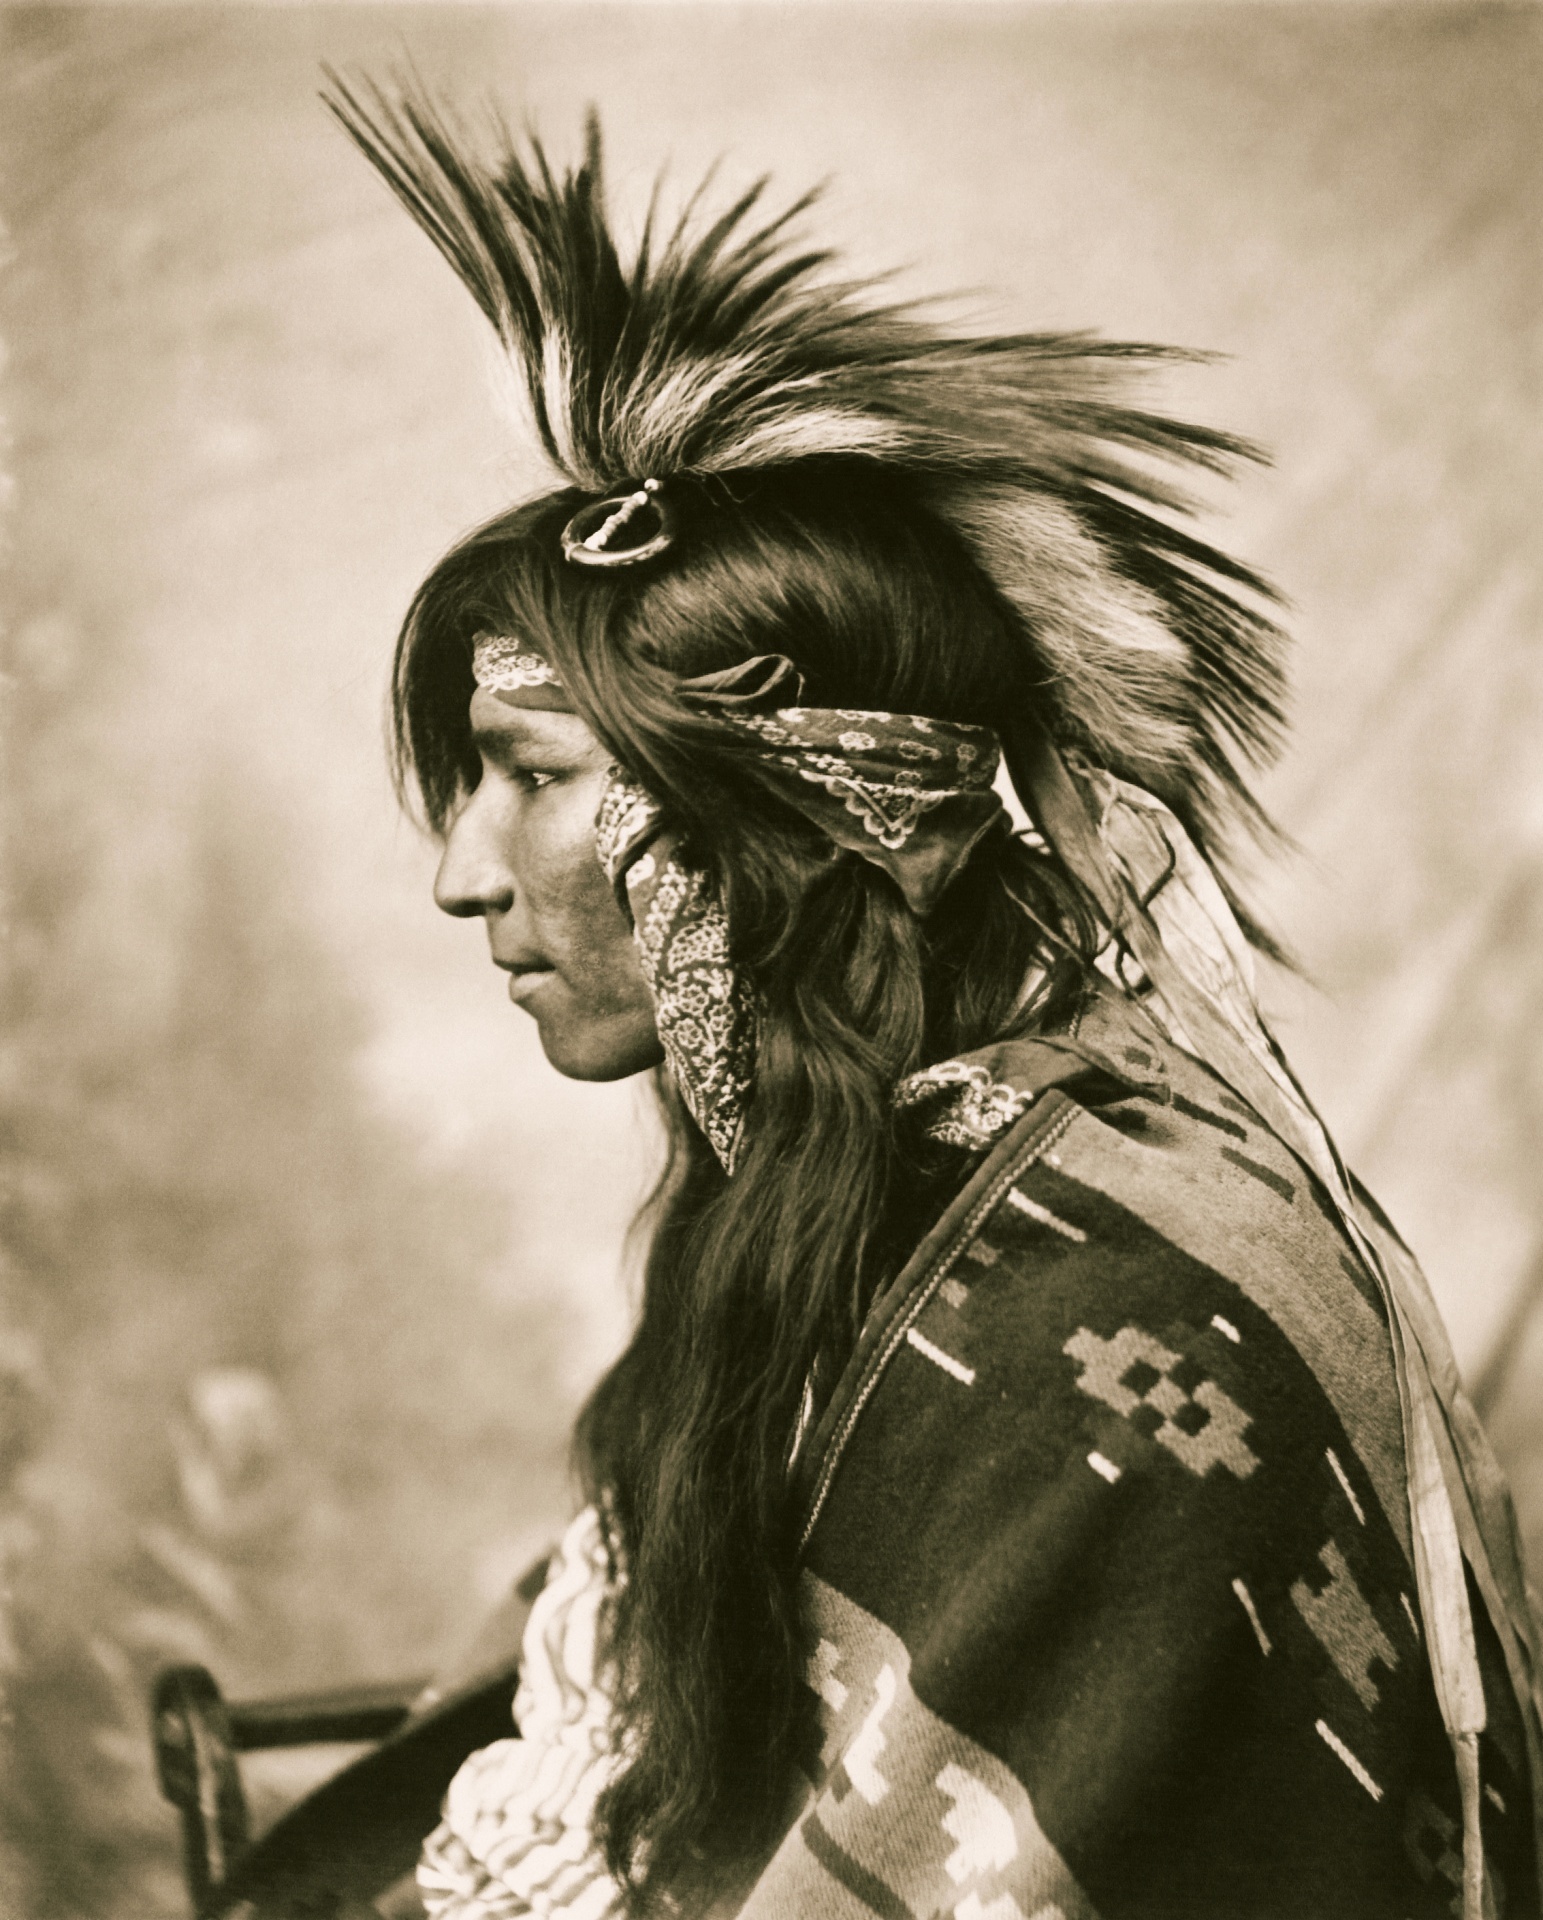 Vintage sepia portrait photo of a cree indian in profile